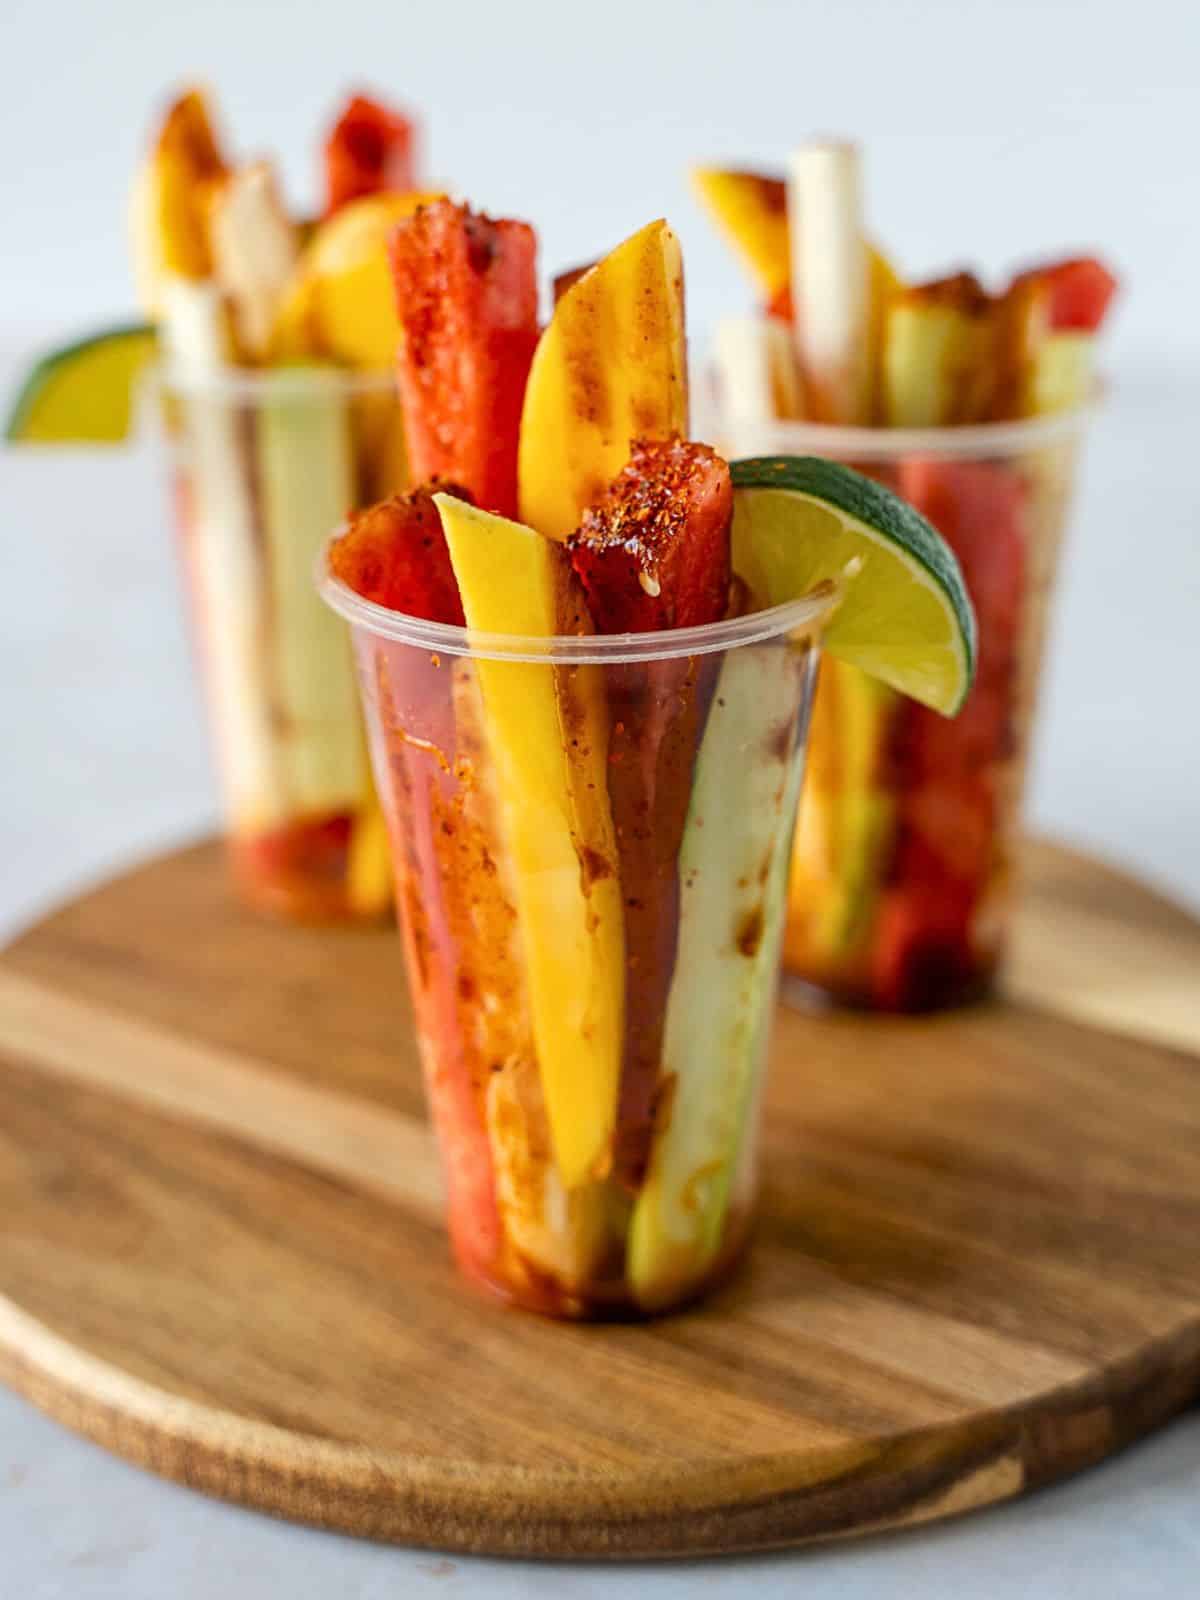 Sliced fruit in a plastic cup topped with chili lime salt and a lime wedge.